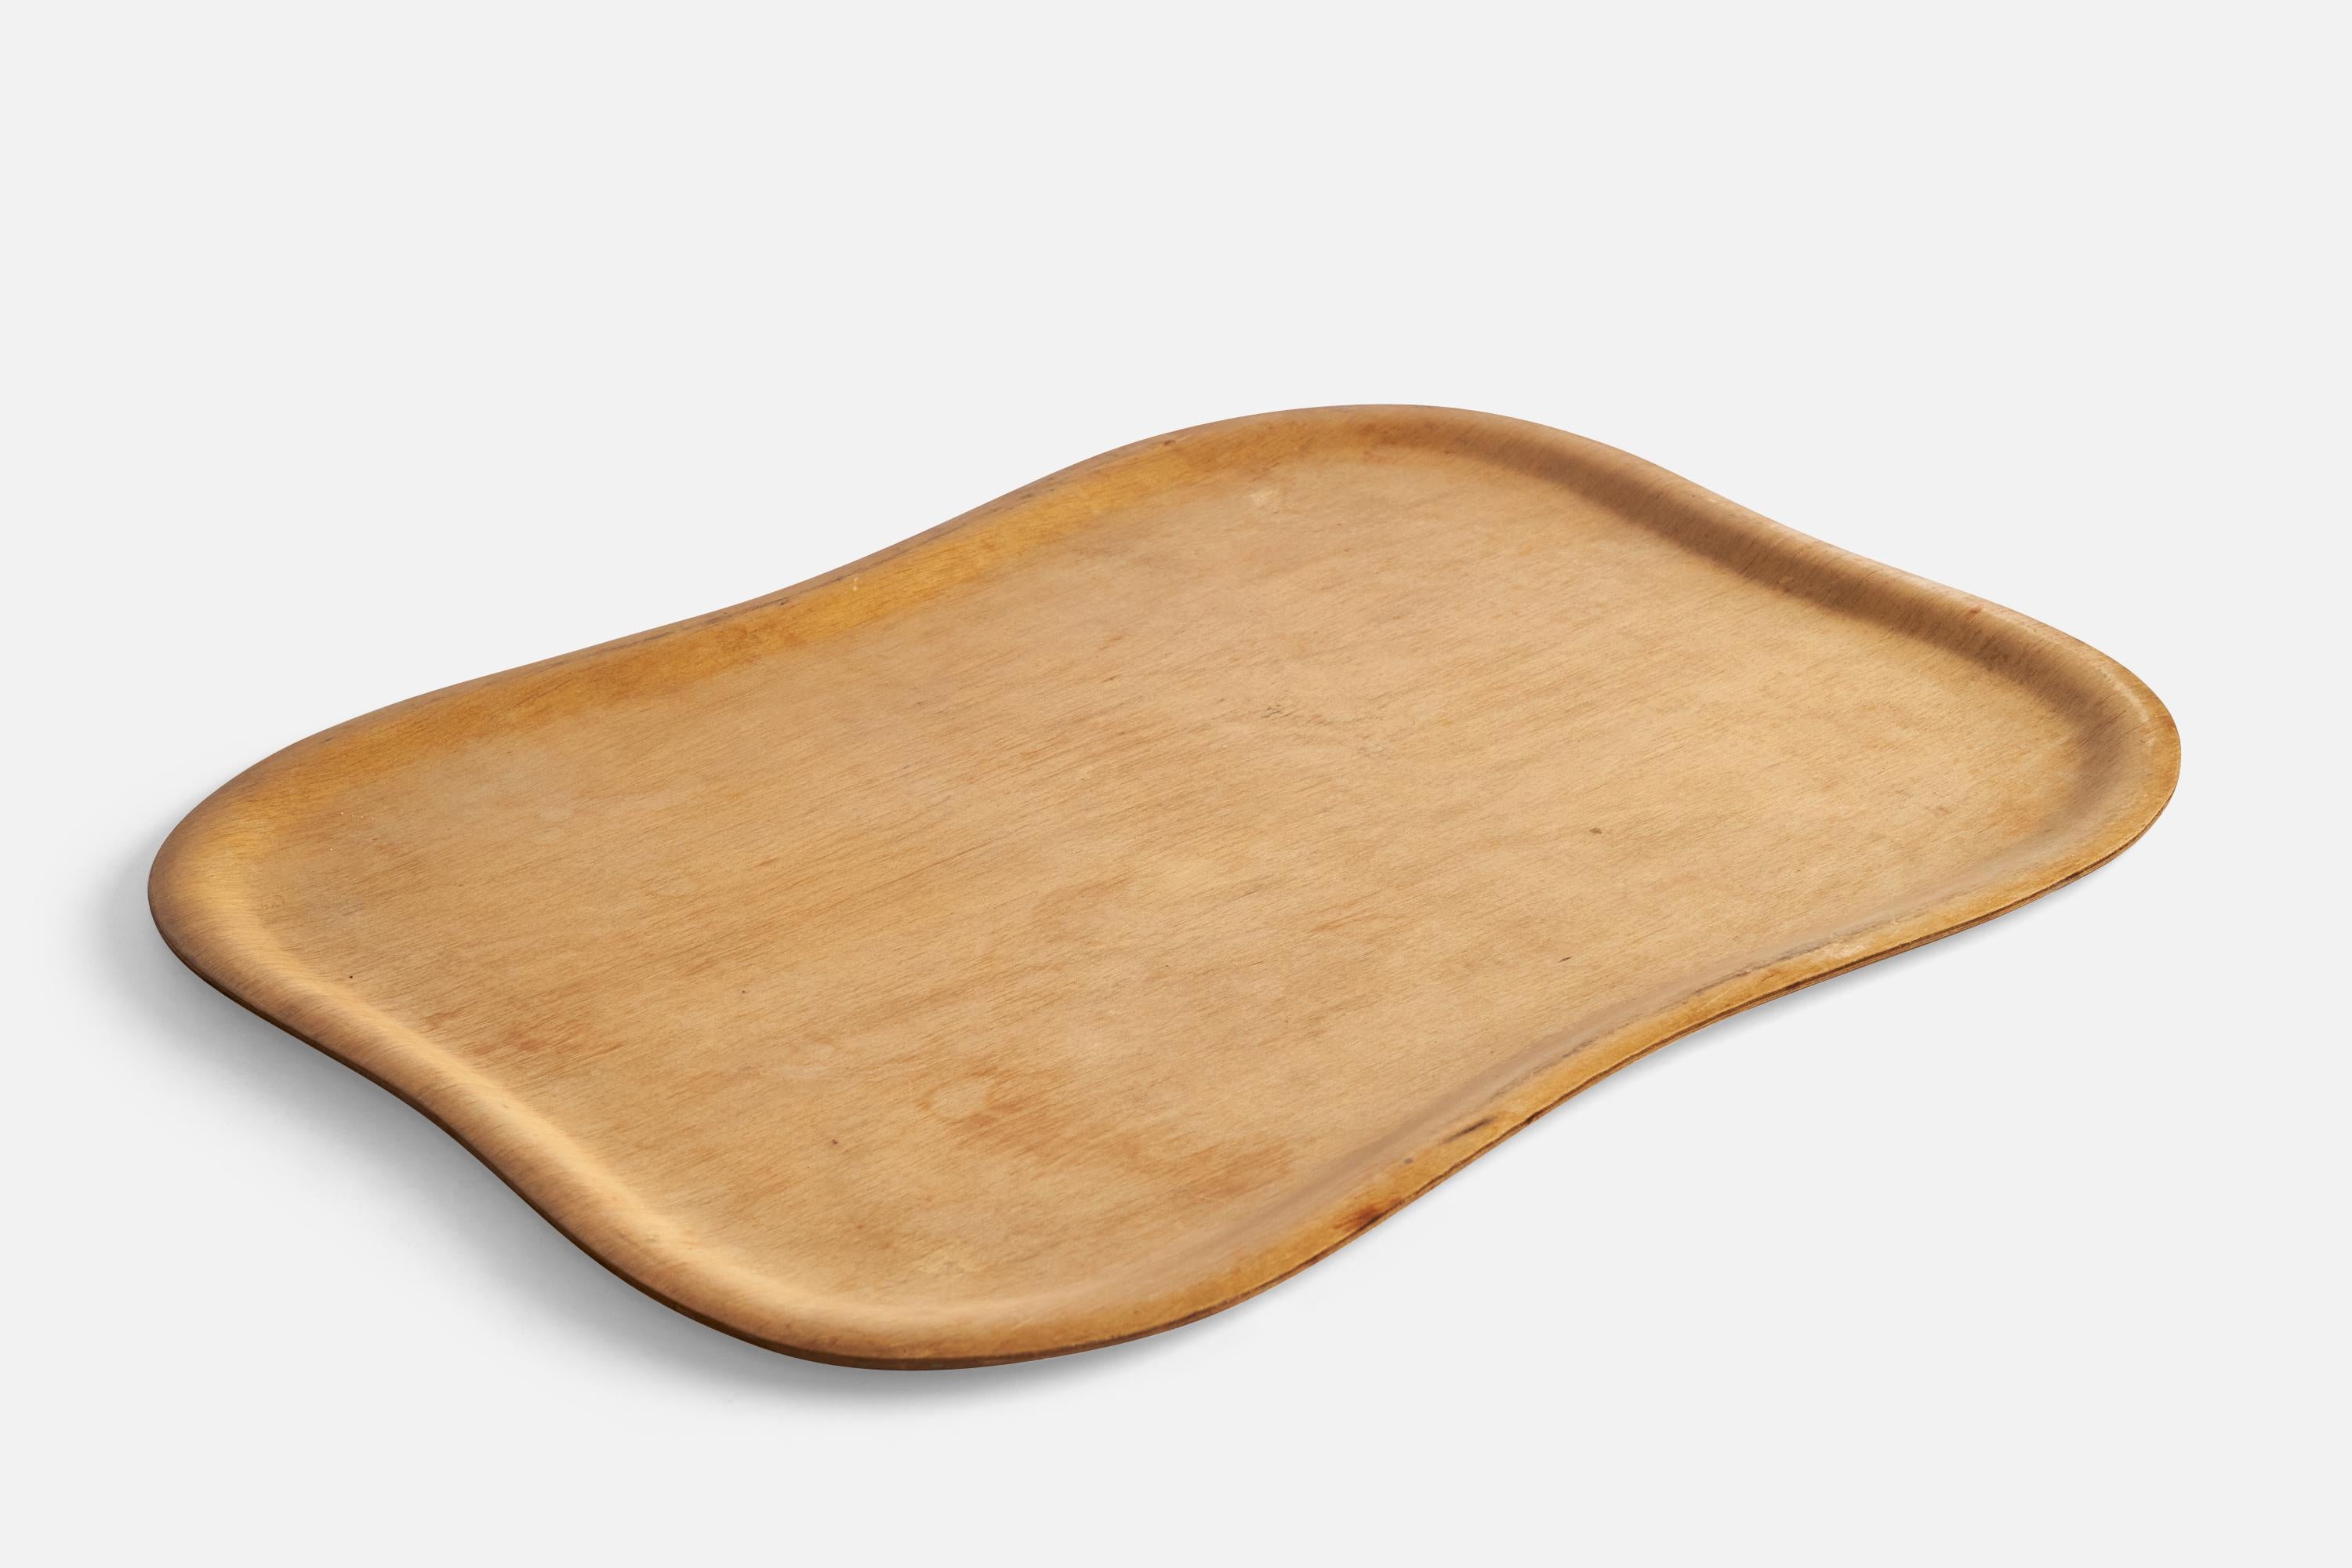 A birch plywood tray designed by Tapio Wirkkala and produced by Soinne & Knioy, Finland, 1950s